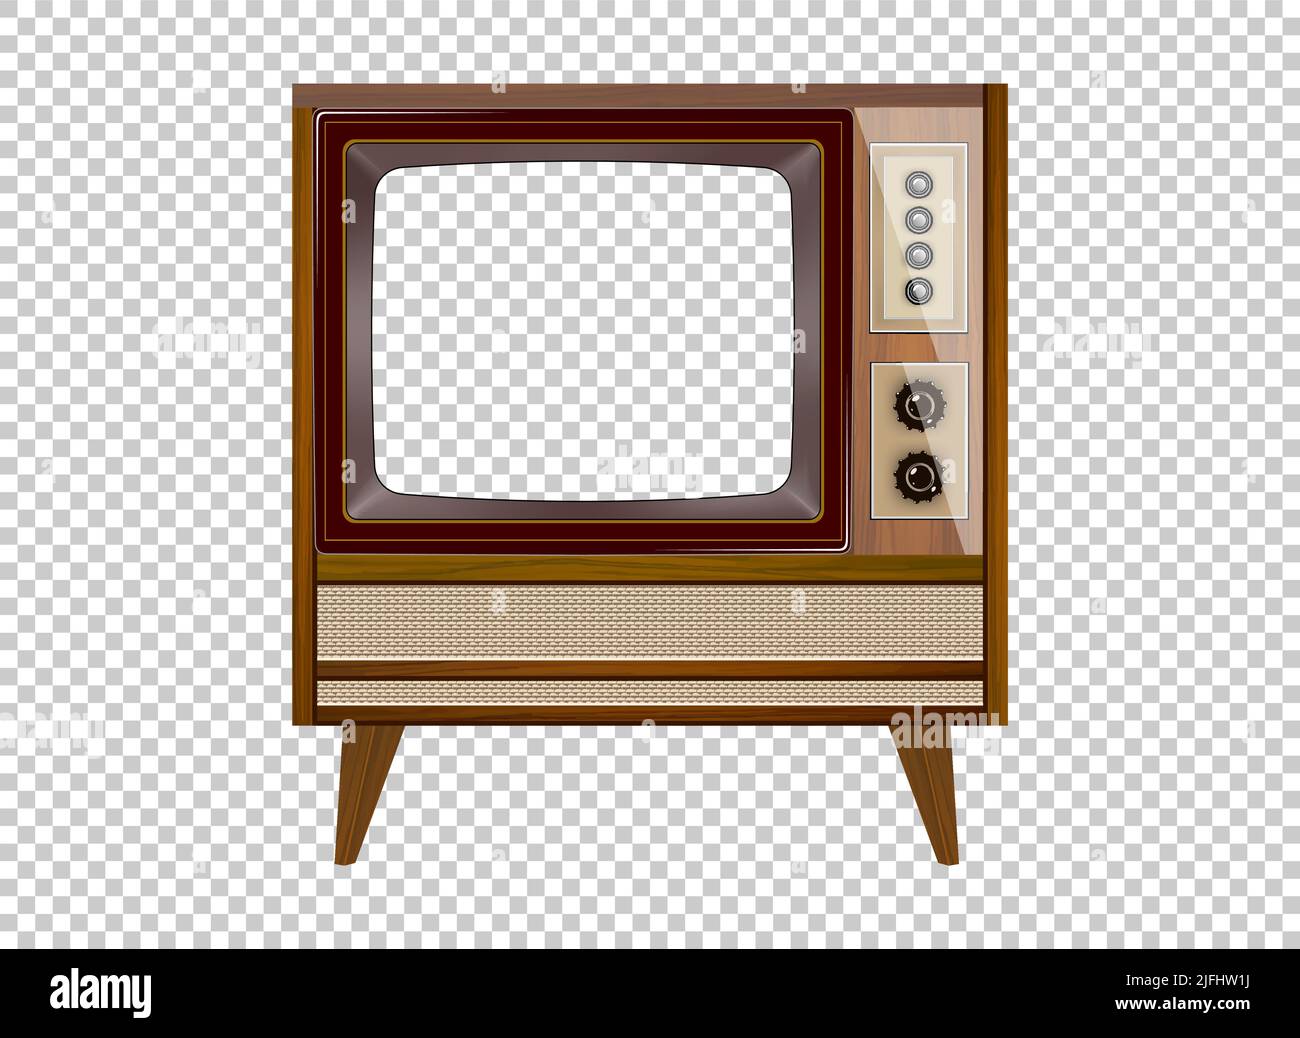 Vector retro television mock up isolate on transparent grid Stock Vector